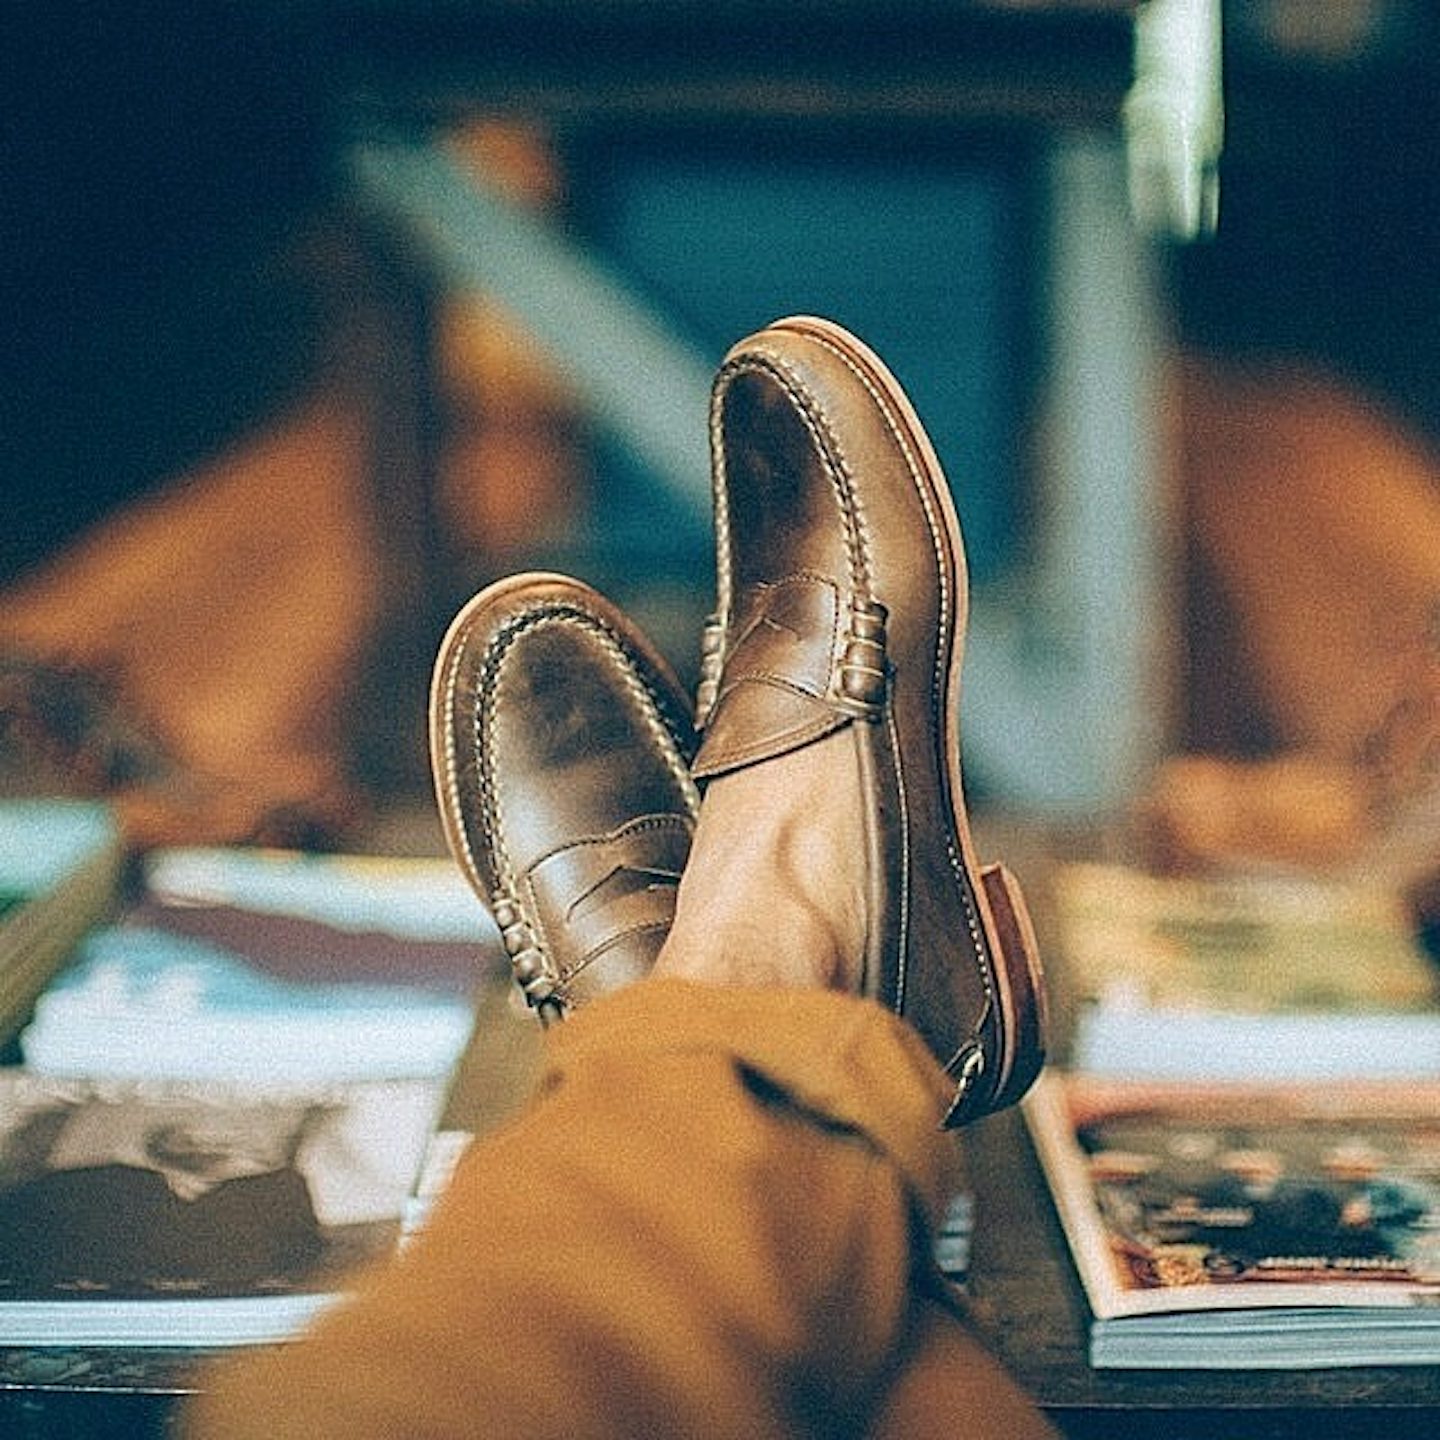 Kicking-back wearing Oak Street Bootmakers Beefroll Penny Loafer in Natural Chromexcel